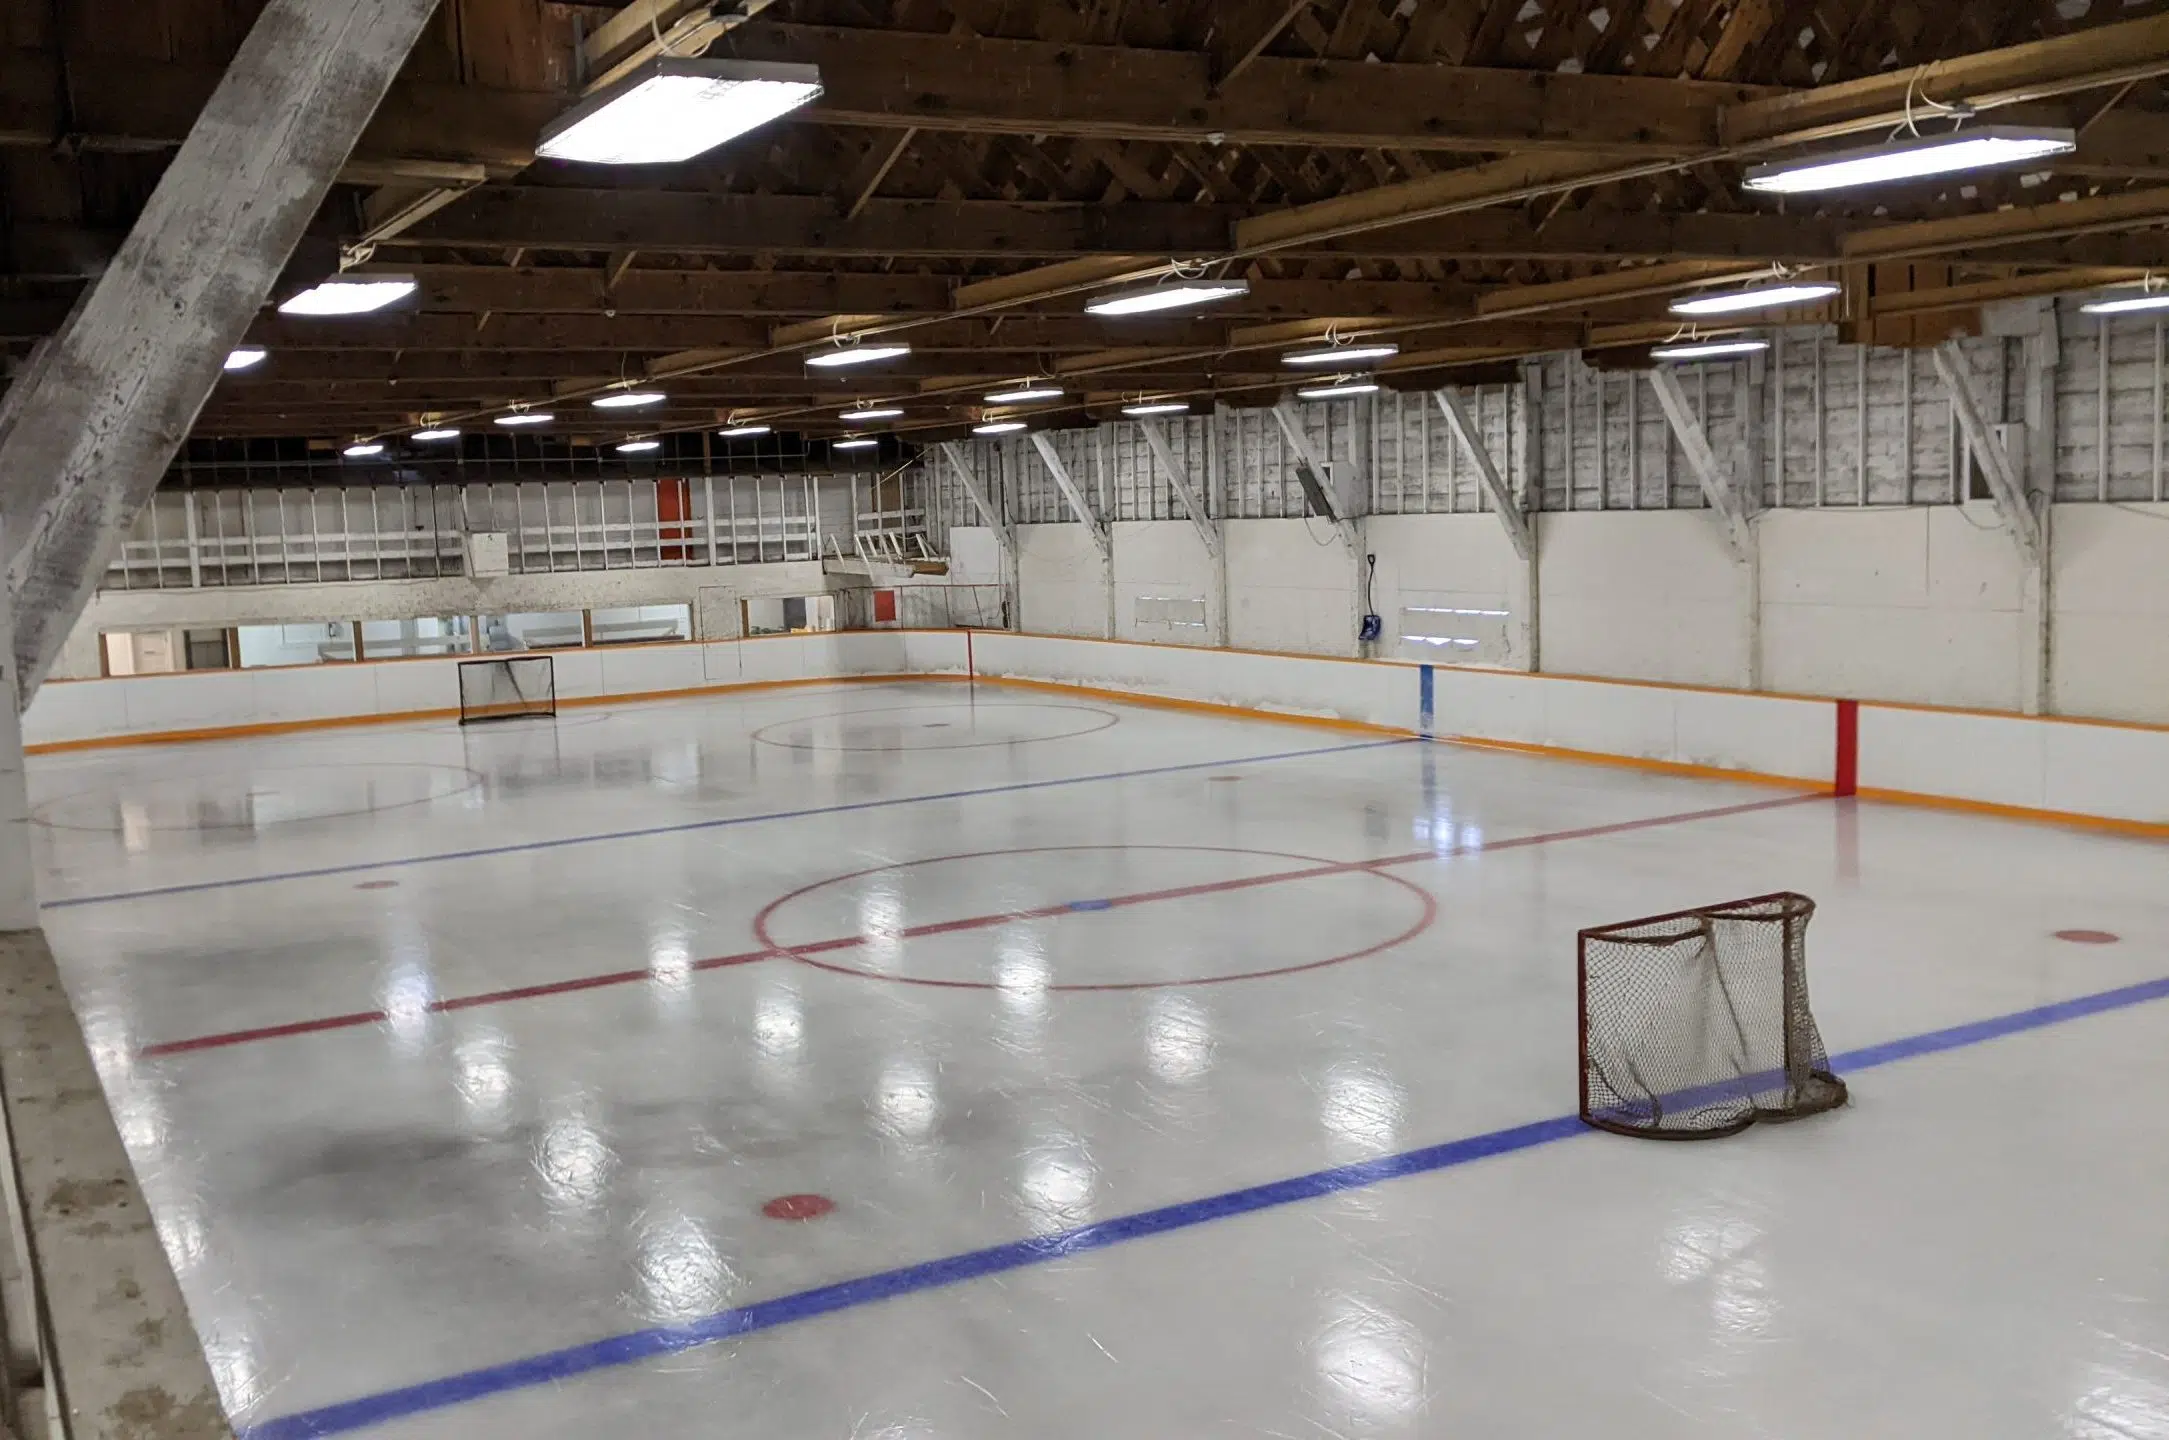 Lang's hockey cathedral draws attention from around the world